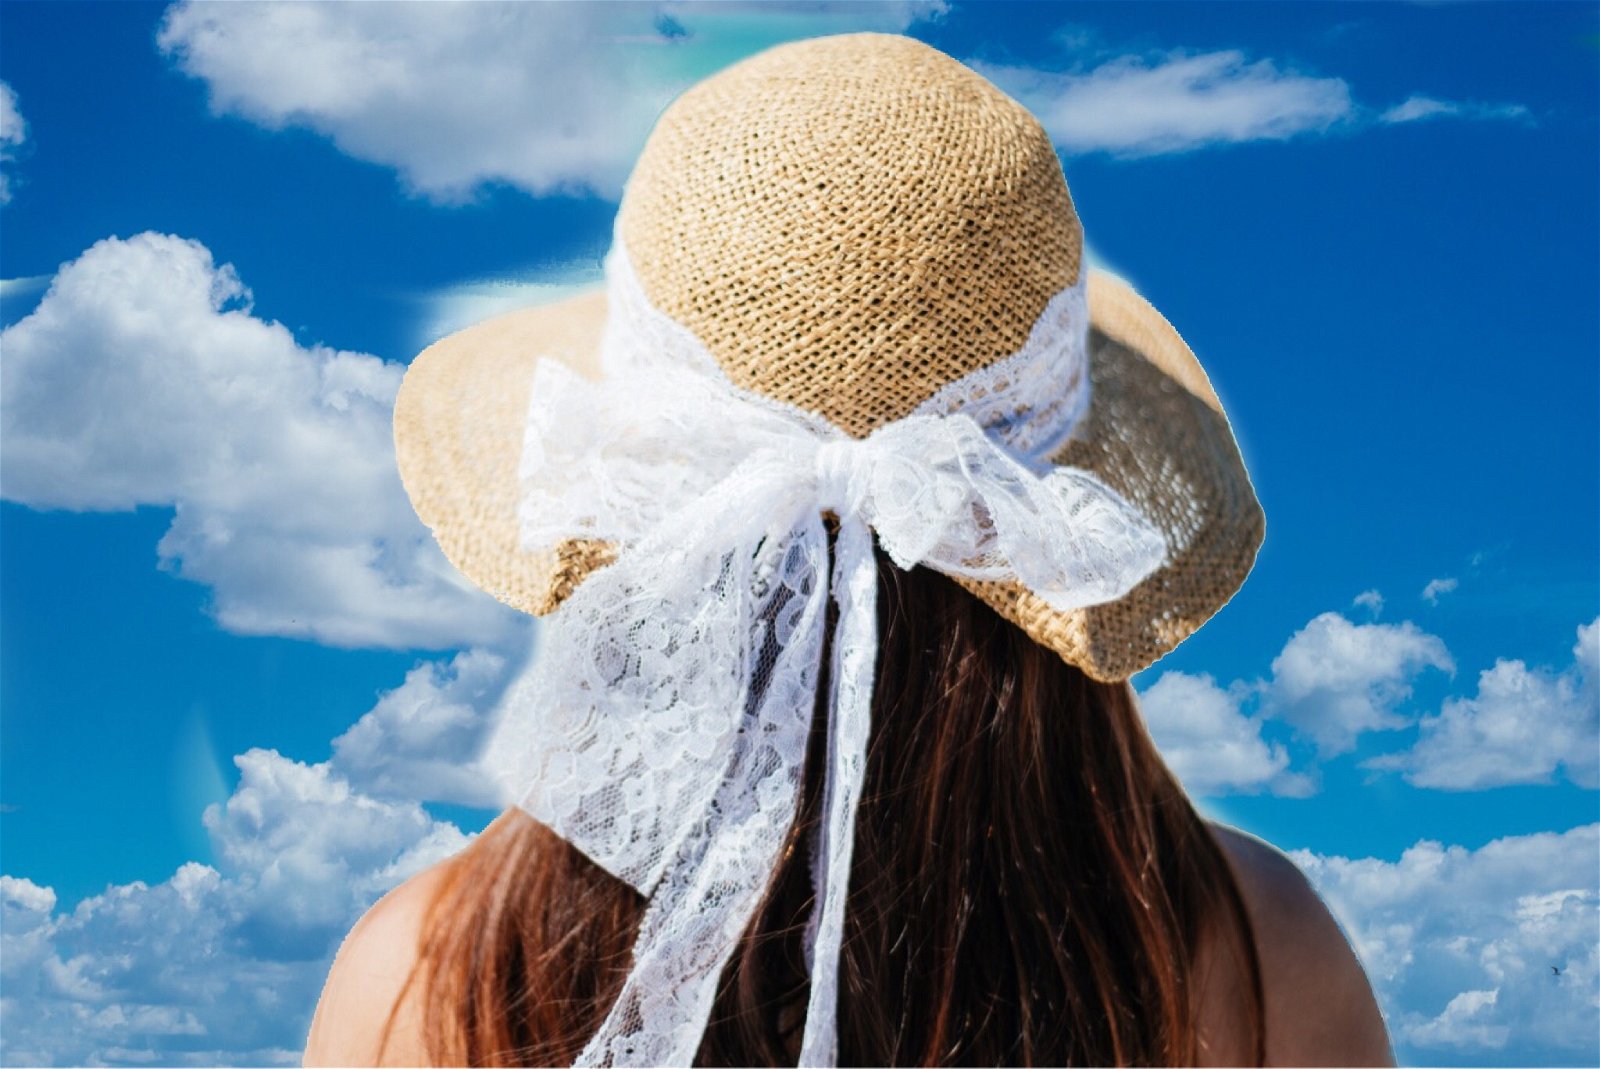 The back of a person's head and sun hat with a white lace bow against a blue sky with white fluff clouds